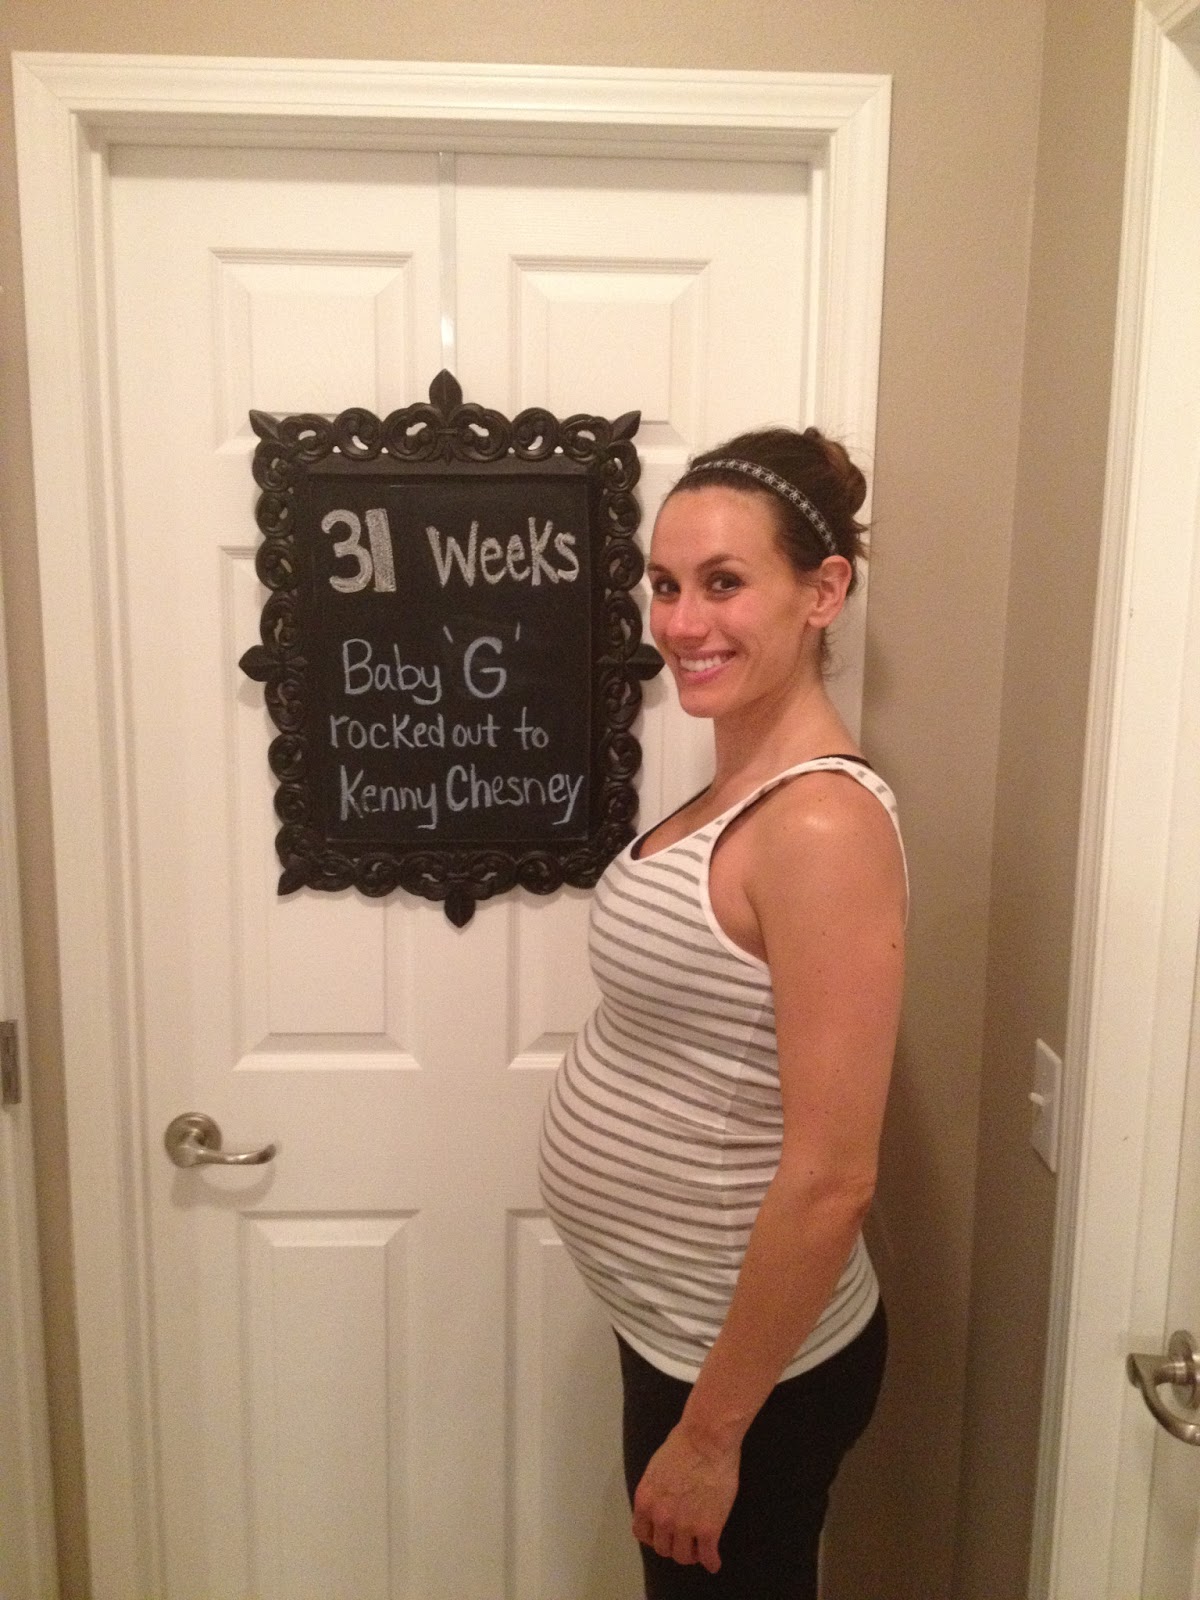 Development Of Baby At 31 Weeks: Your Baby Is Almost Here!